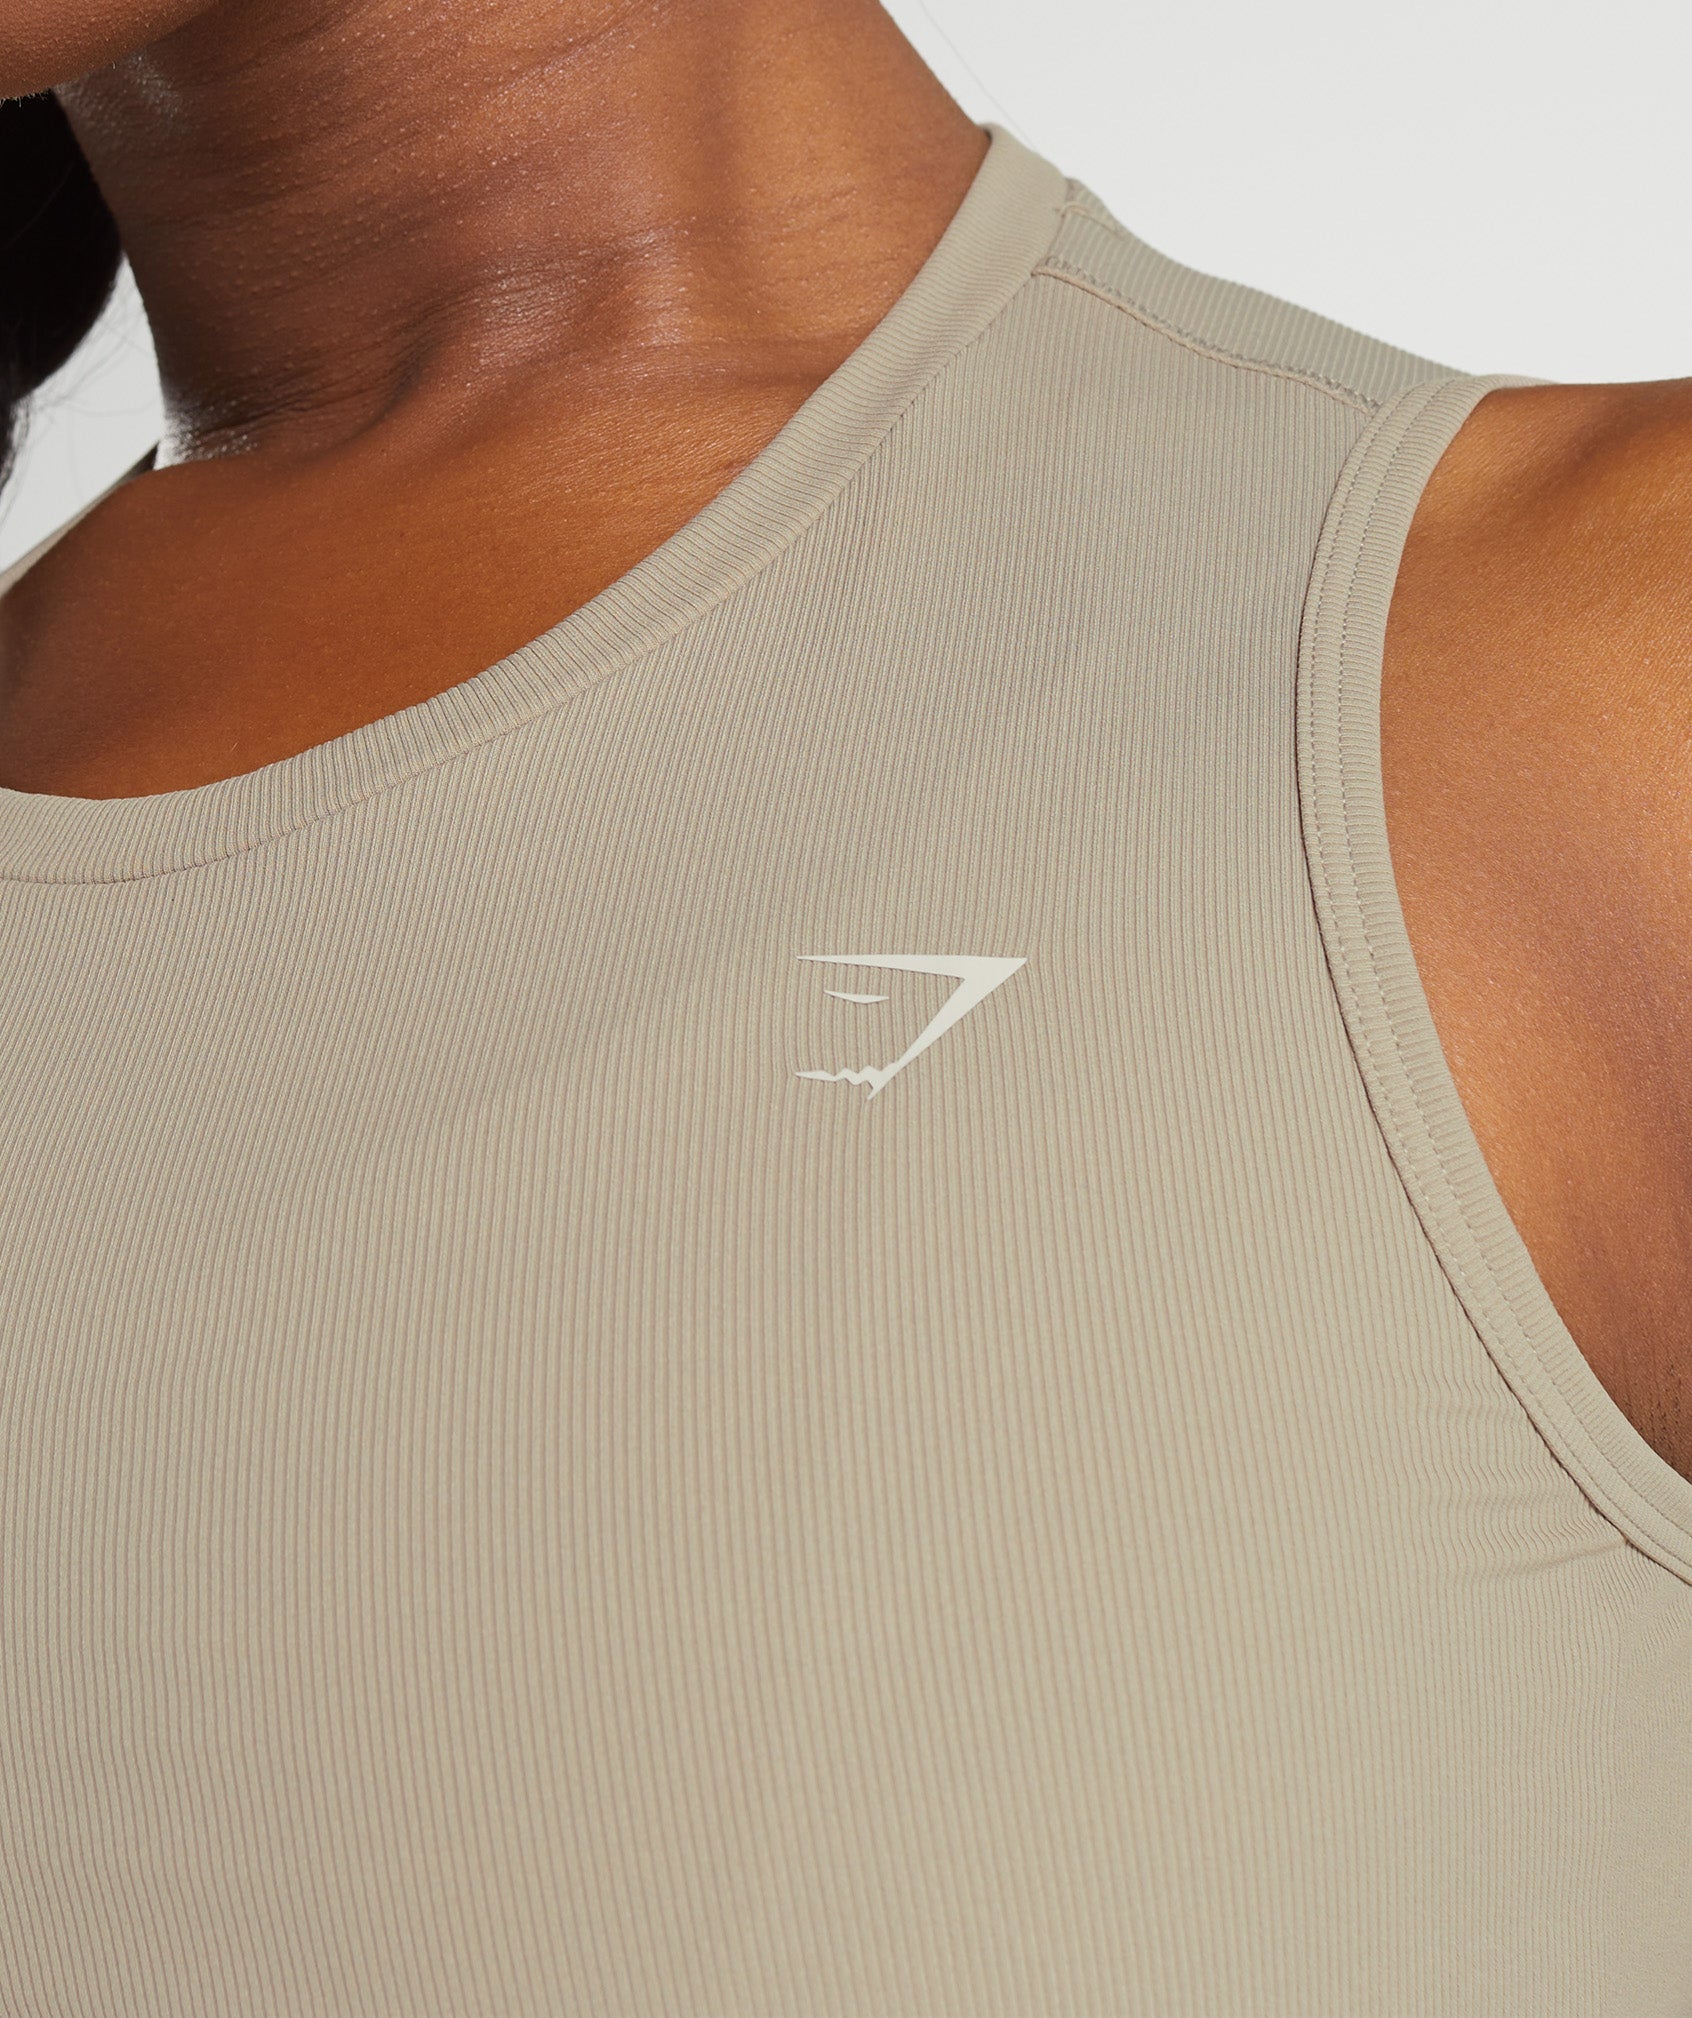 Elevate Asymmetric Tank in Cement Brown